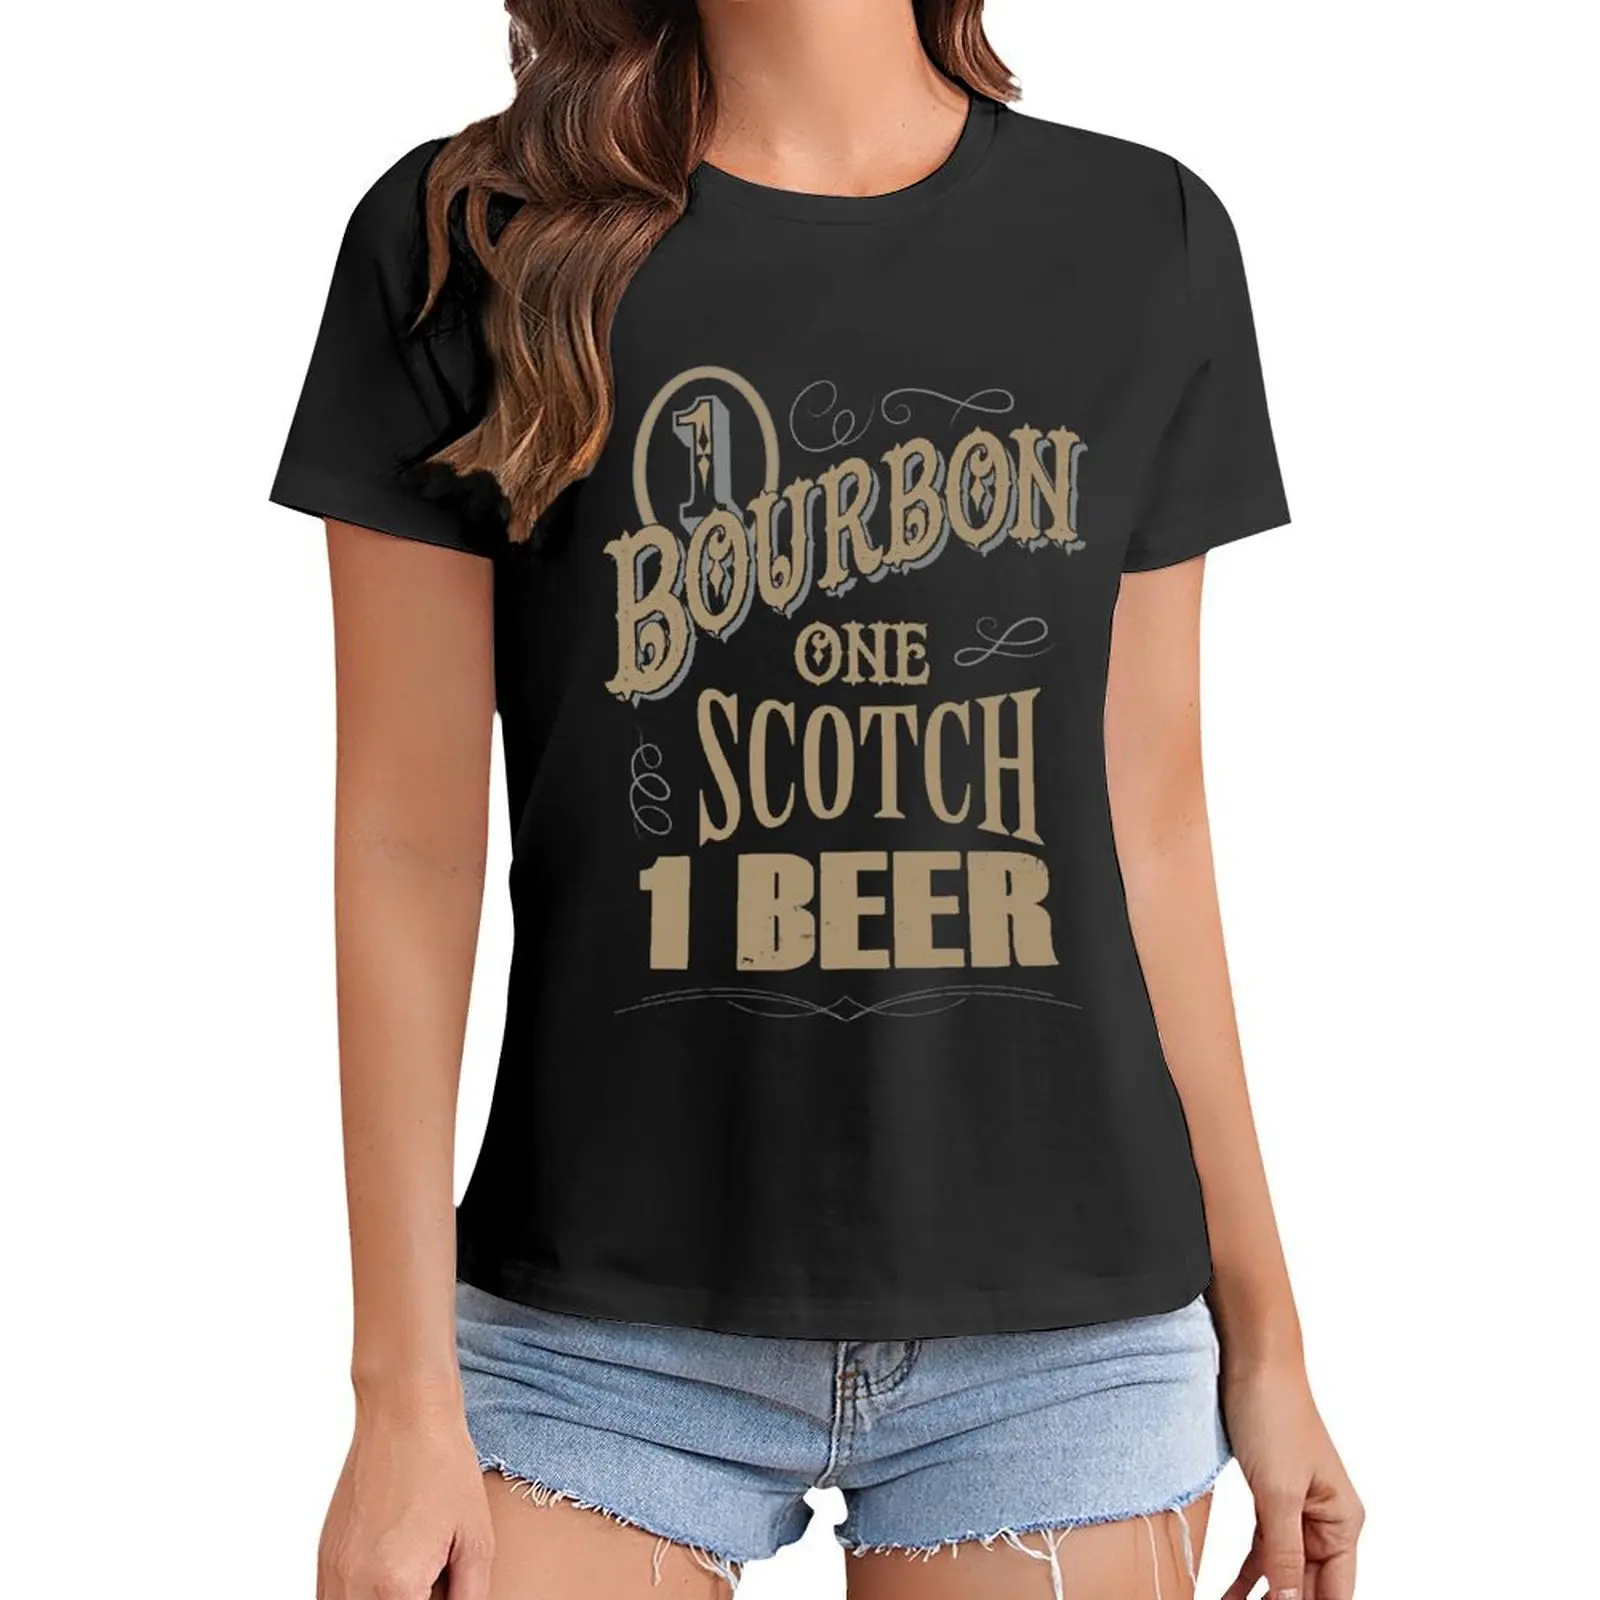 

One bourbon one scotch one beer T-Shirt lady clothes summer tops Women t shirt